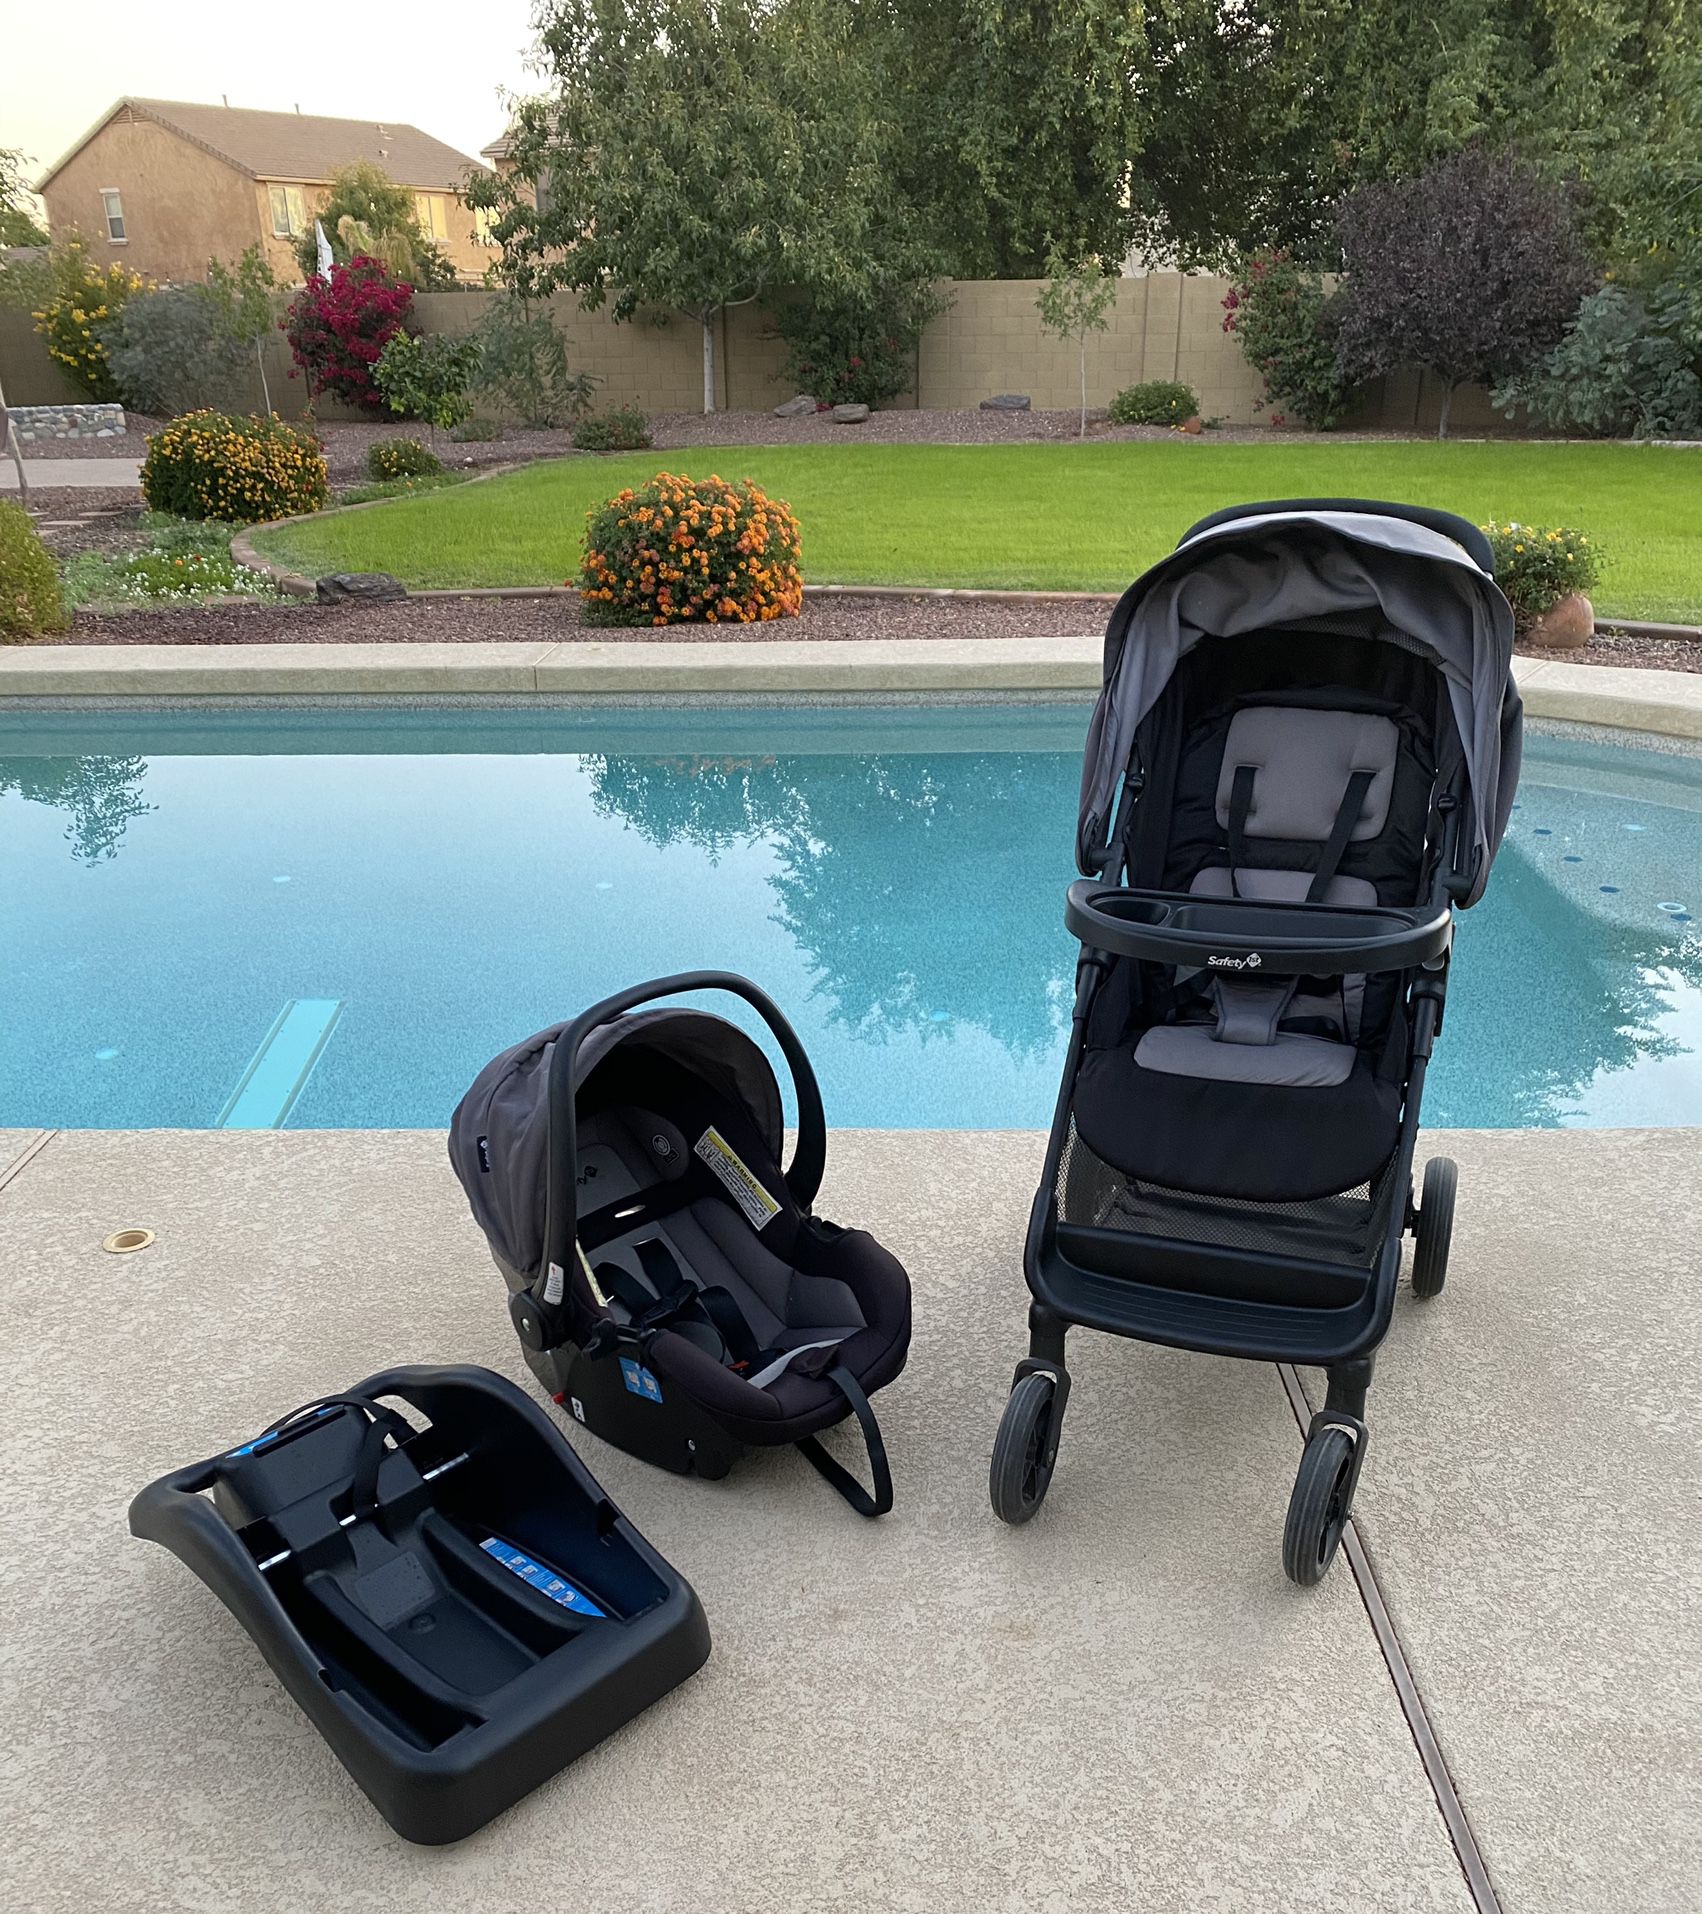 Safety 1st car seat and stroller travel system in great condition. Good until 2025. No accidents.